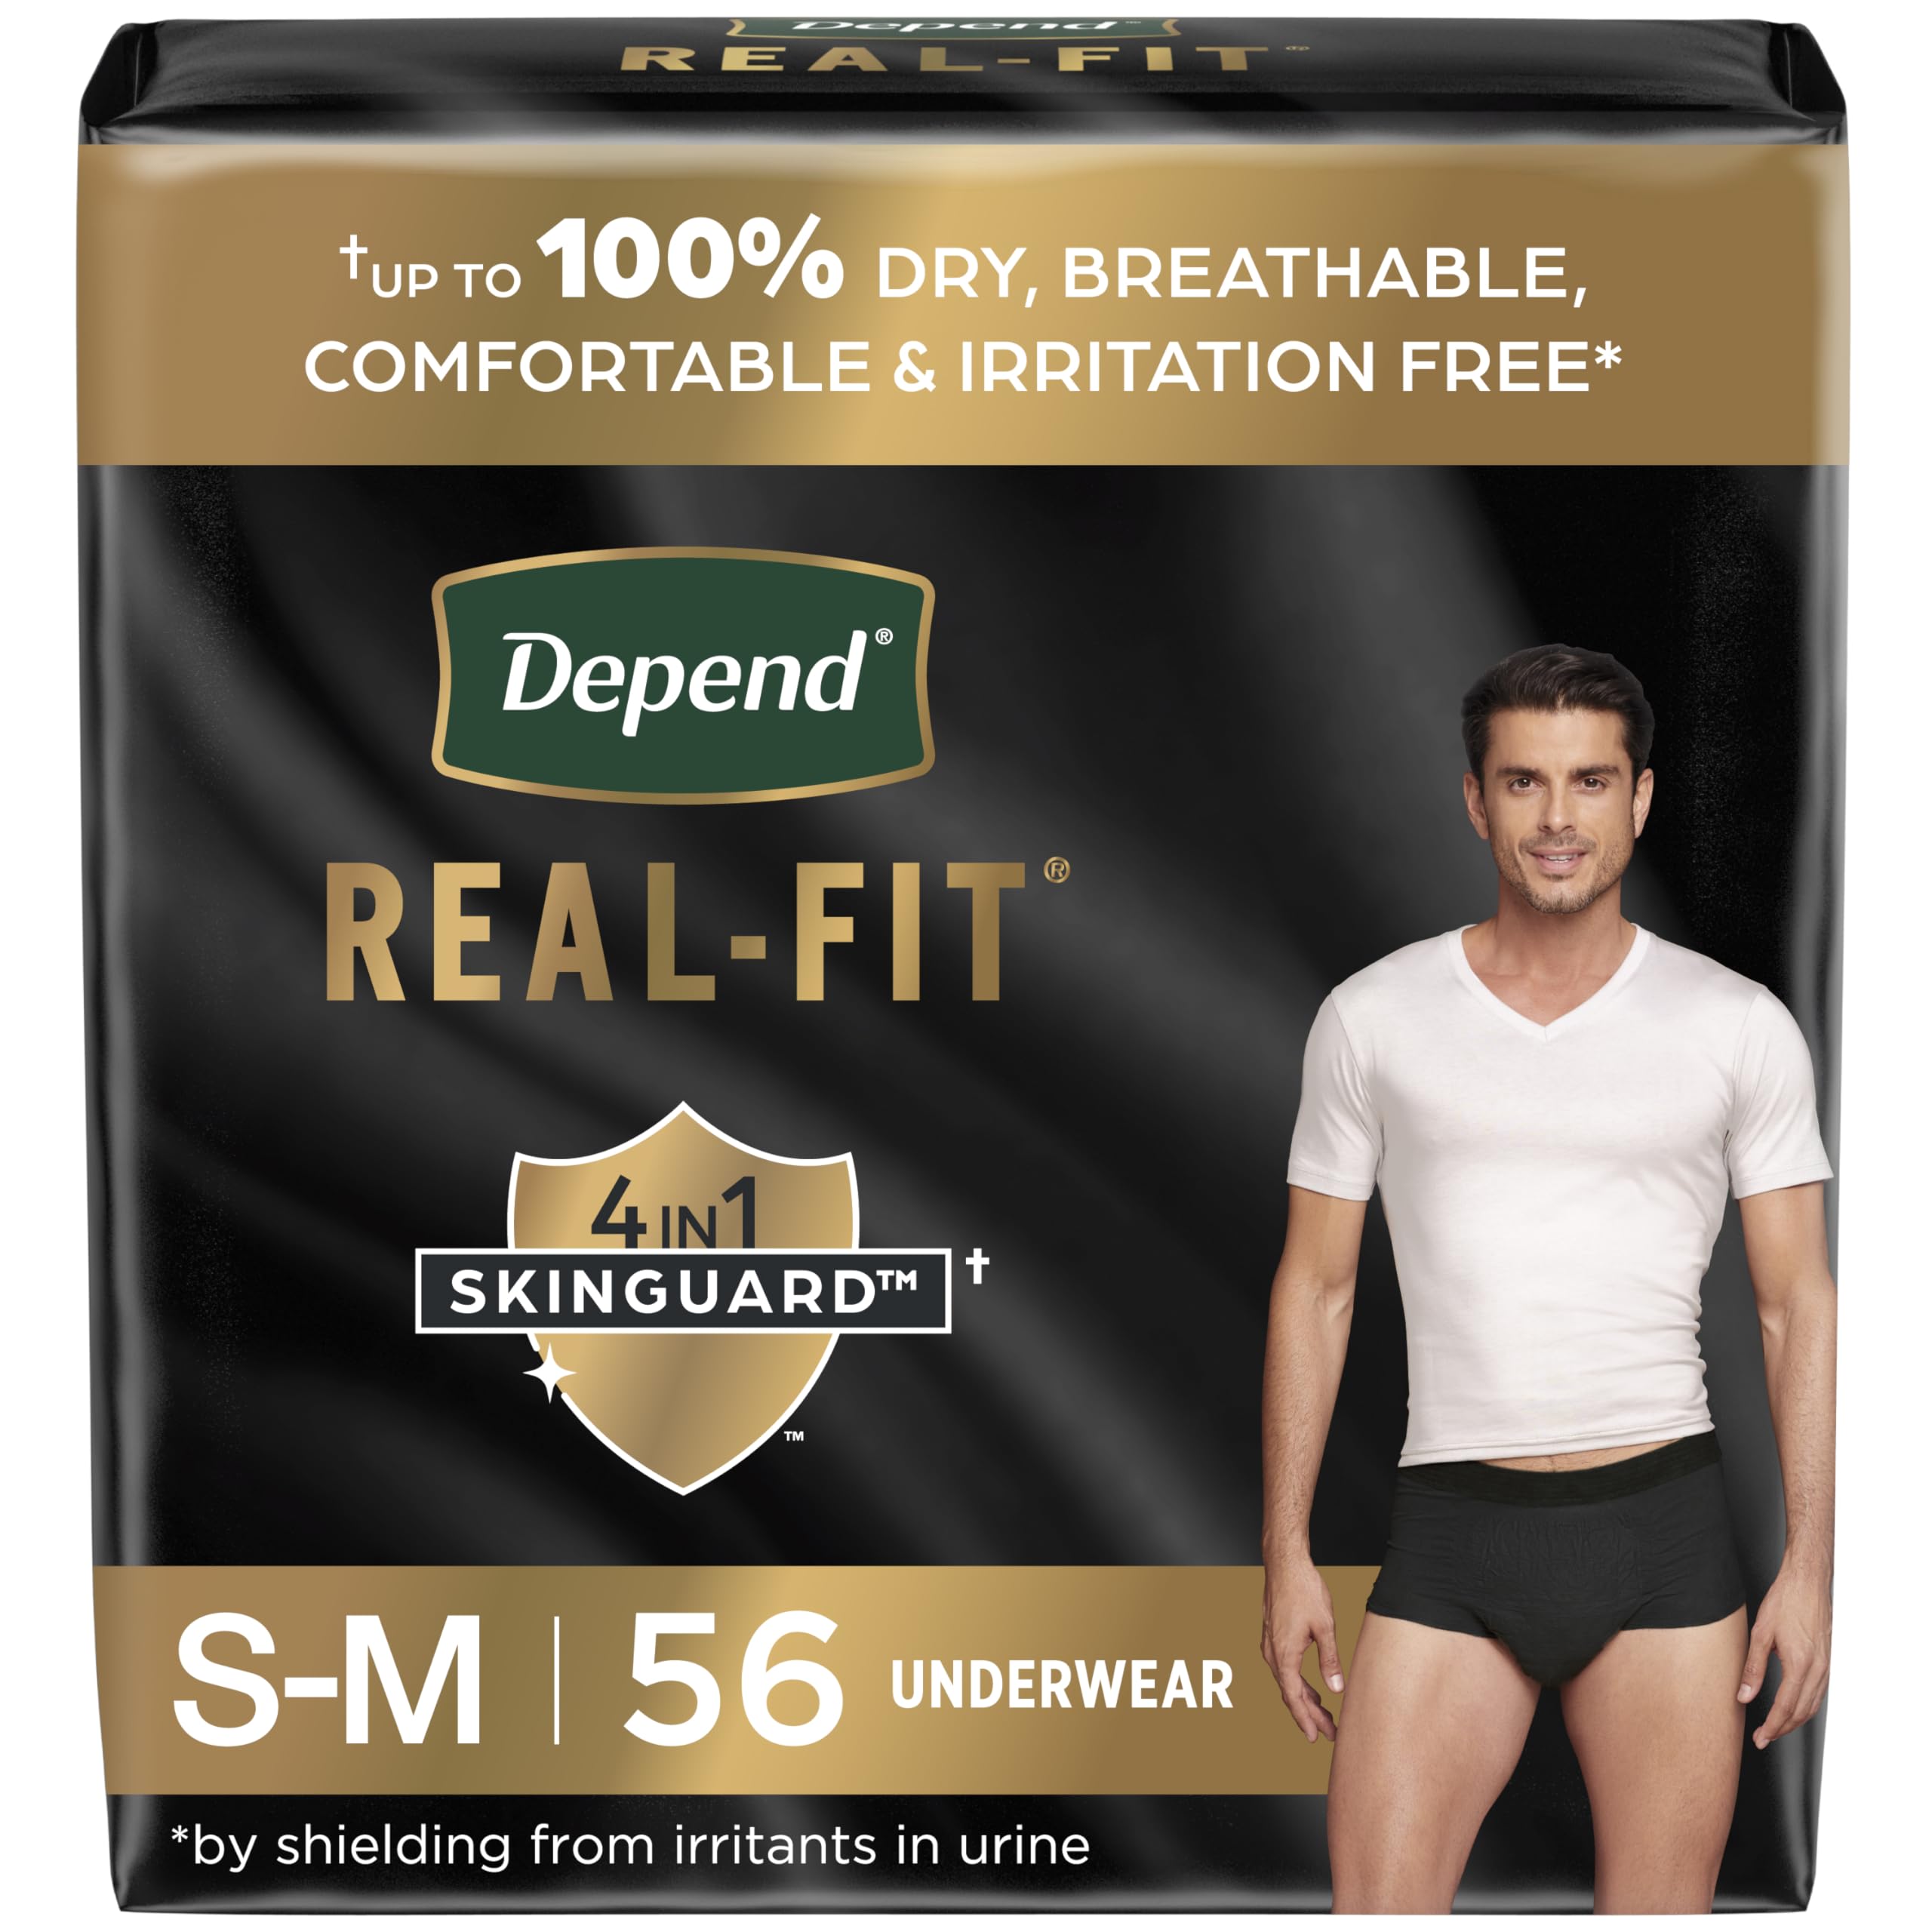 Depend Real Fit Incontinence Underwear for Men, Disposable, Maximum Absorbency, Small/Medium, Black, 56 Count, Packaging May Vary